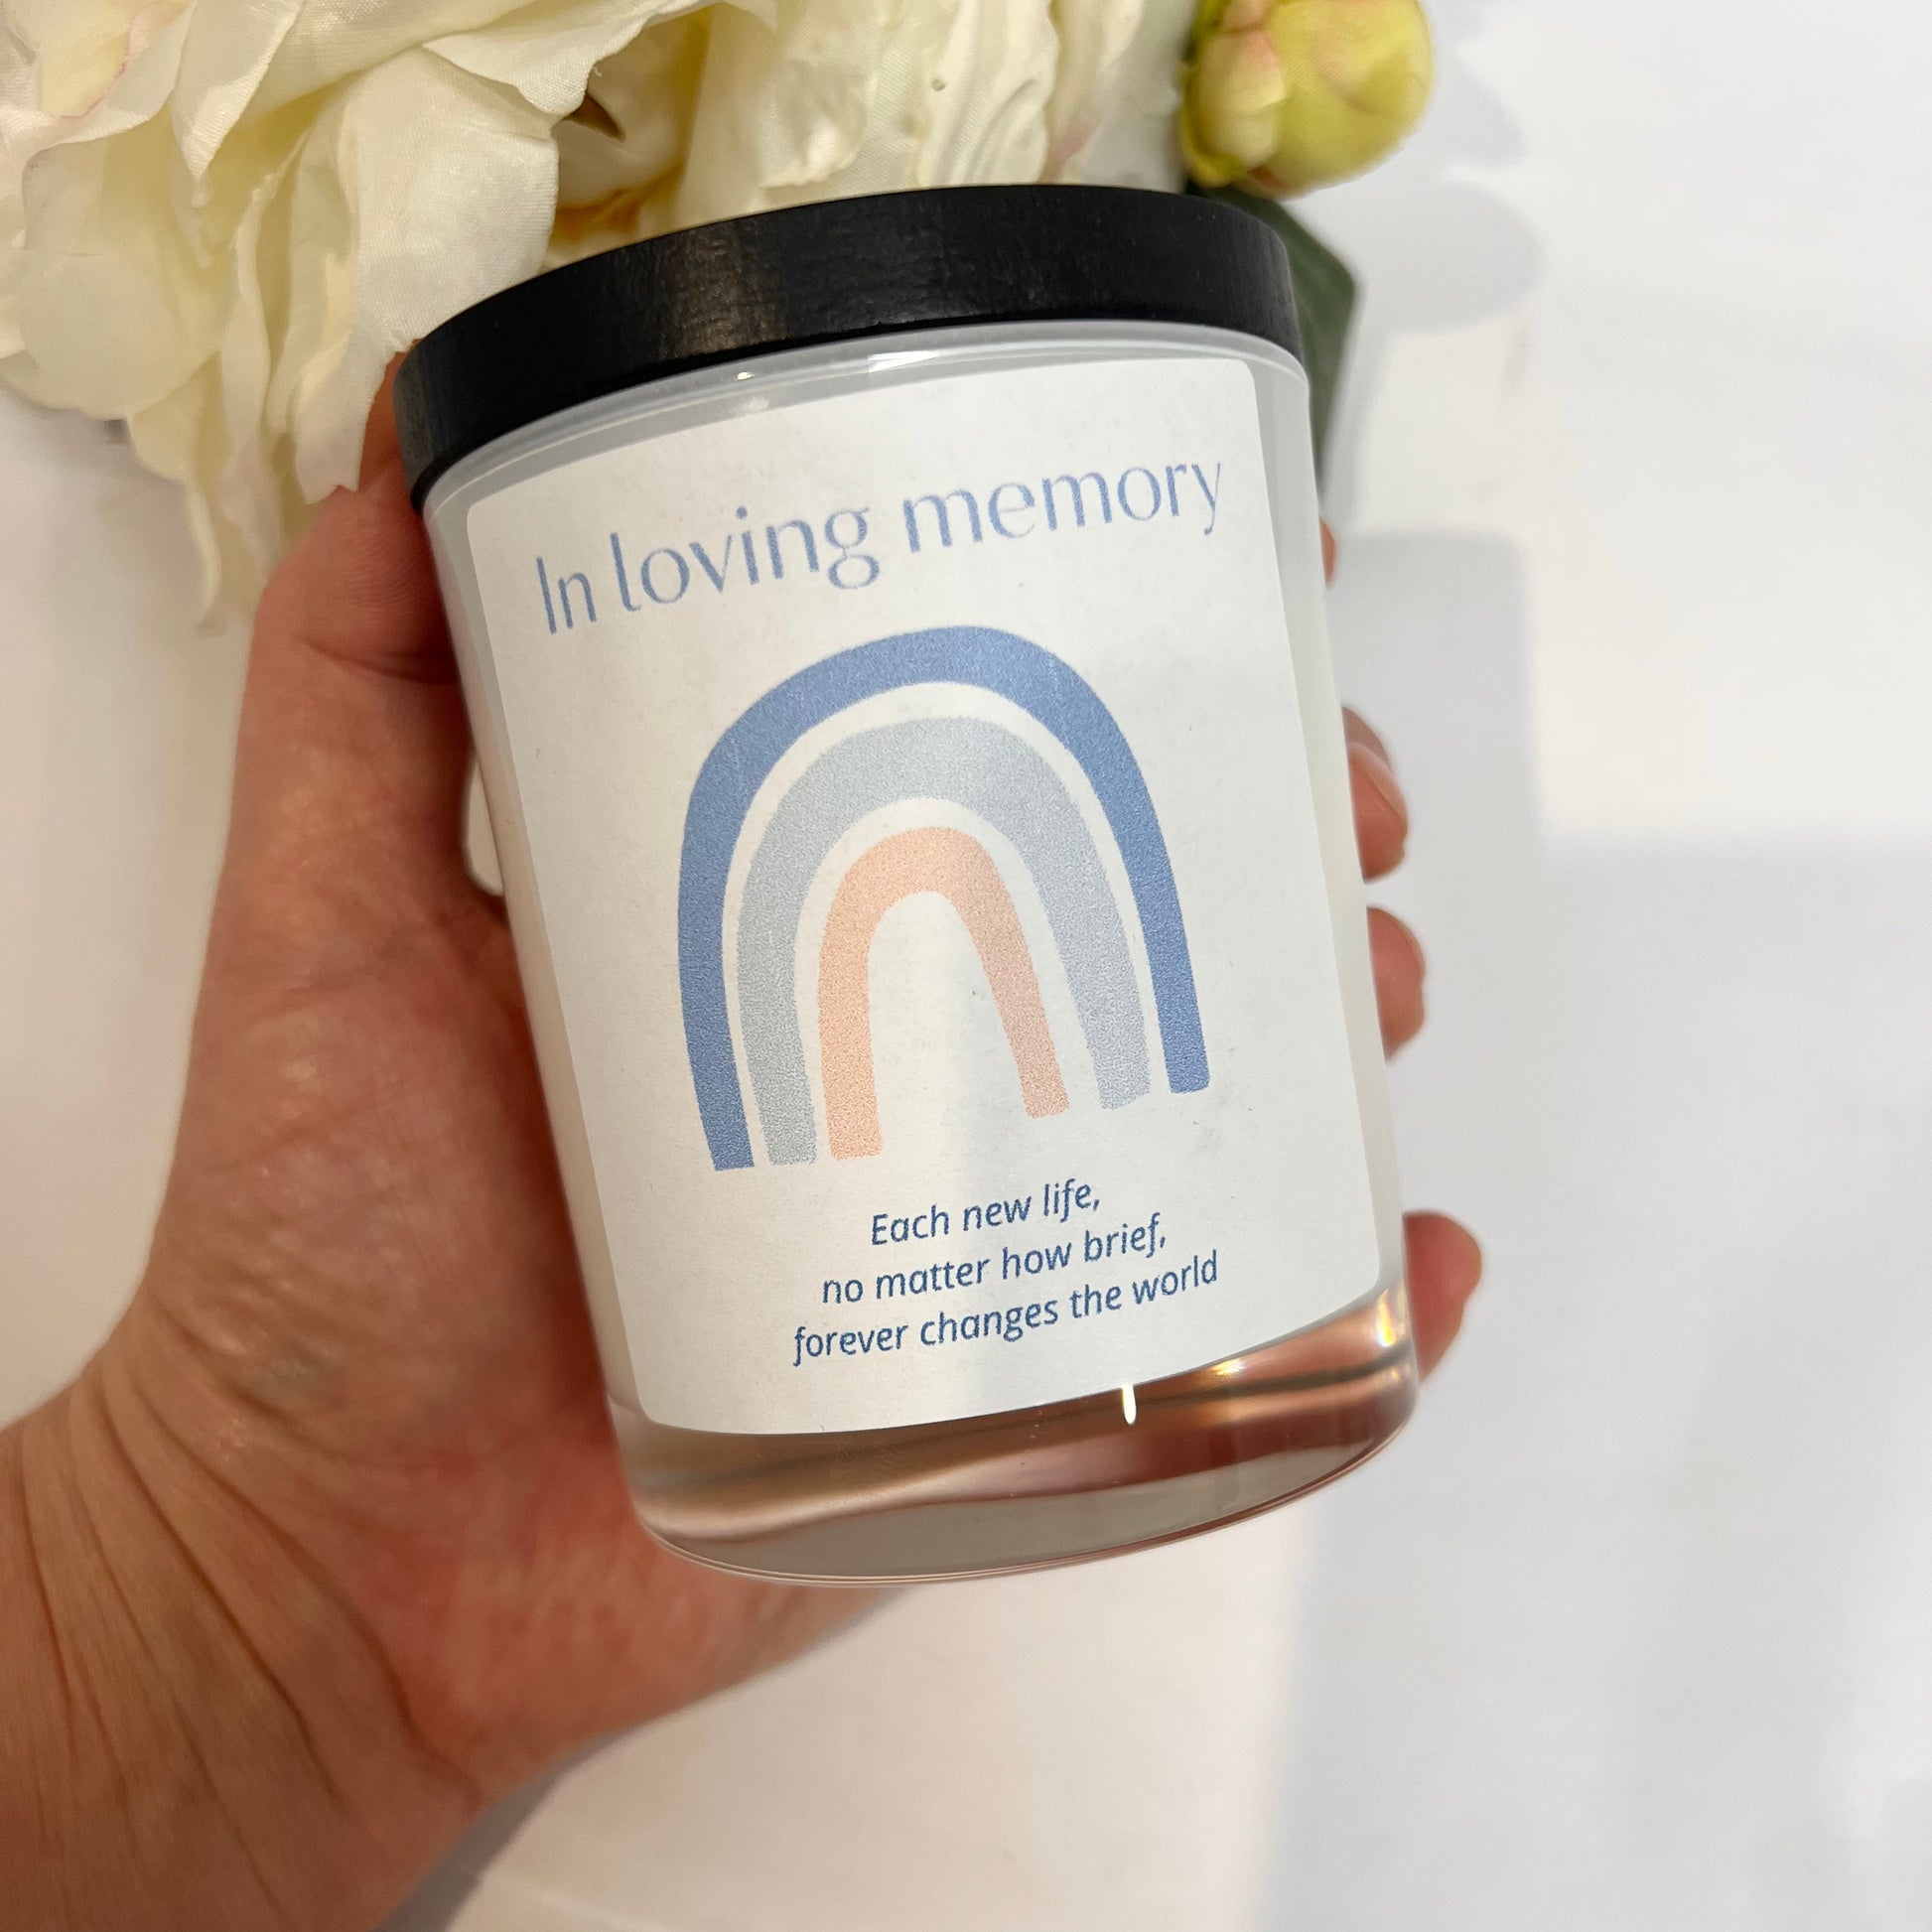 In Loving Memory baby loss candle